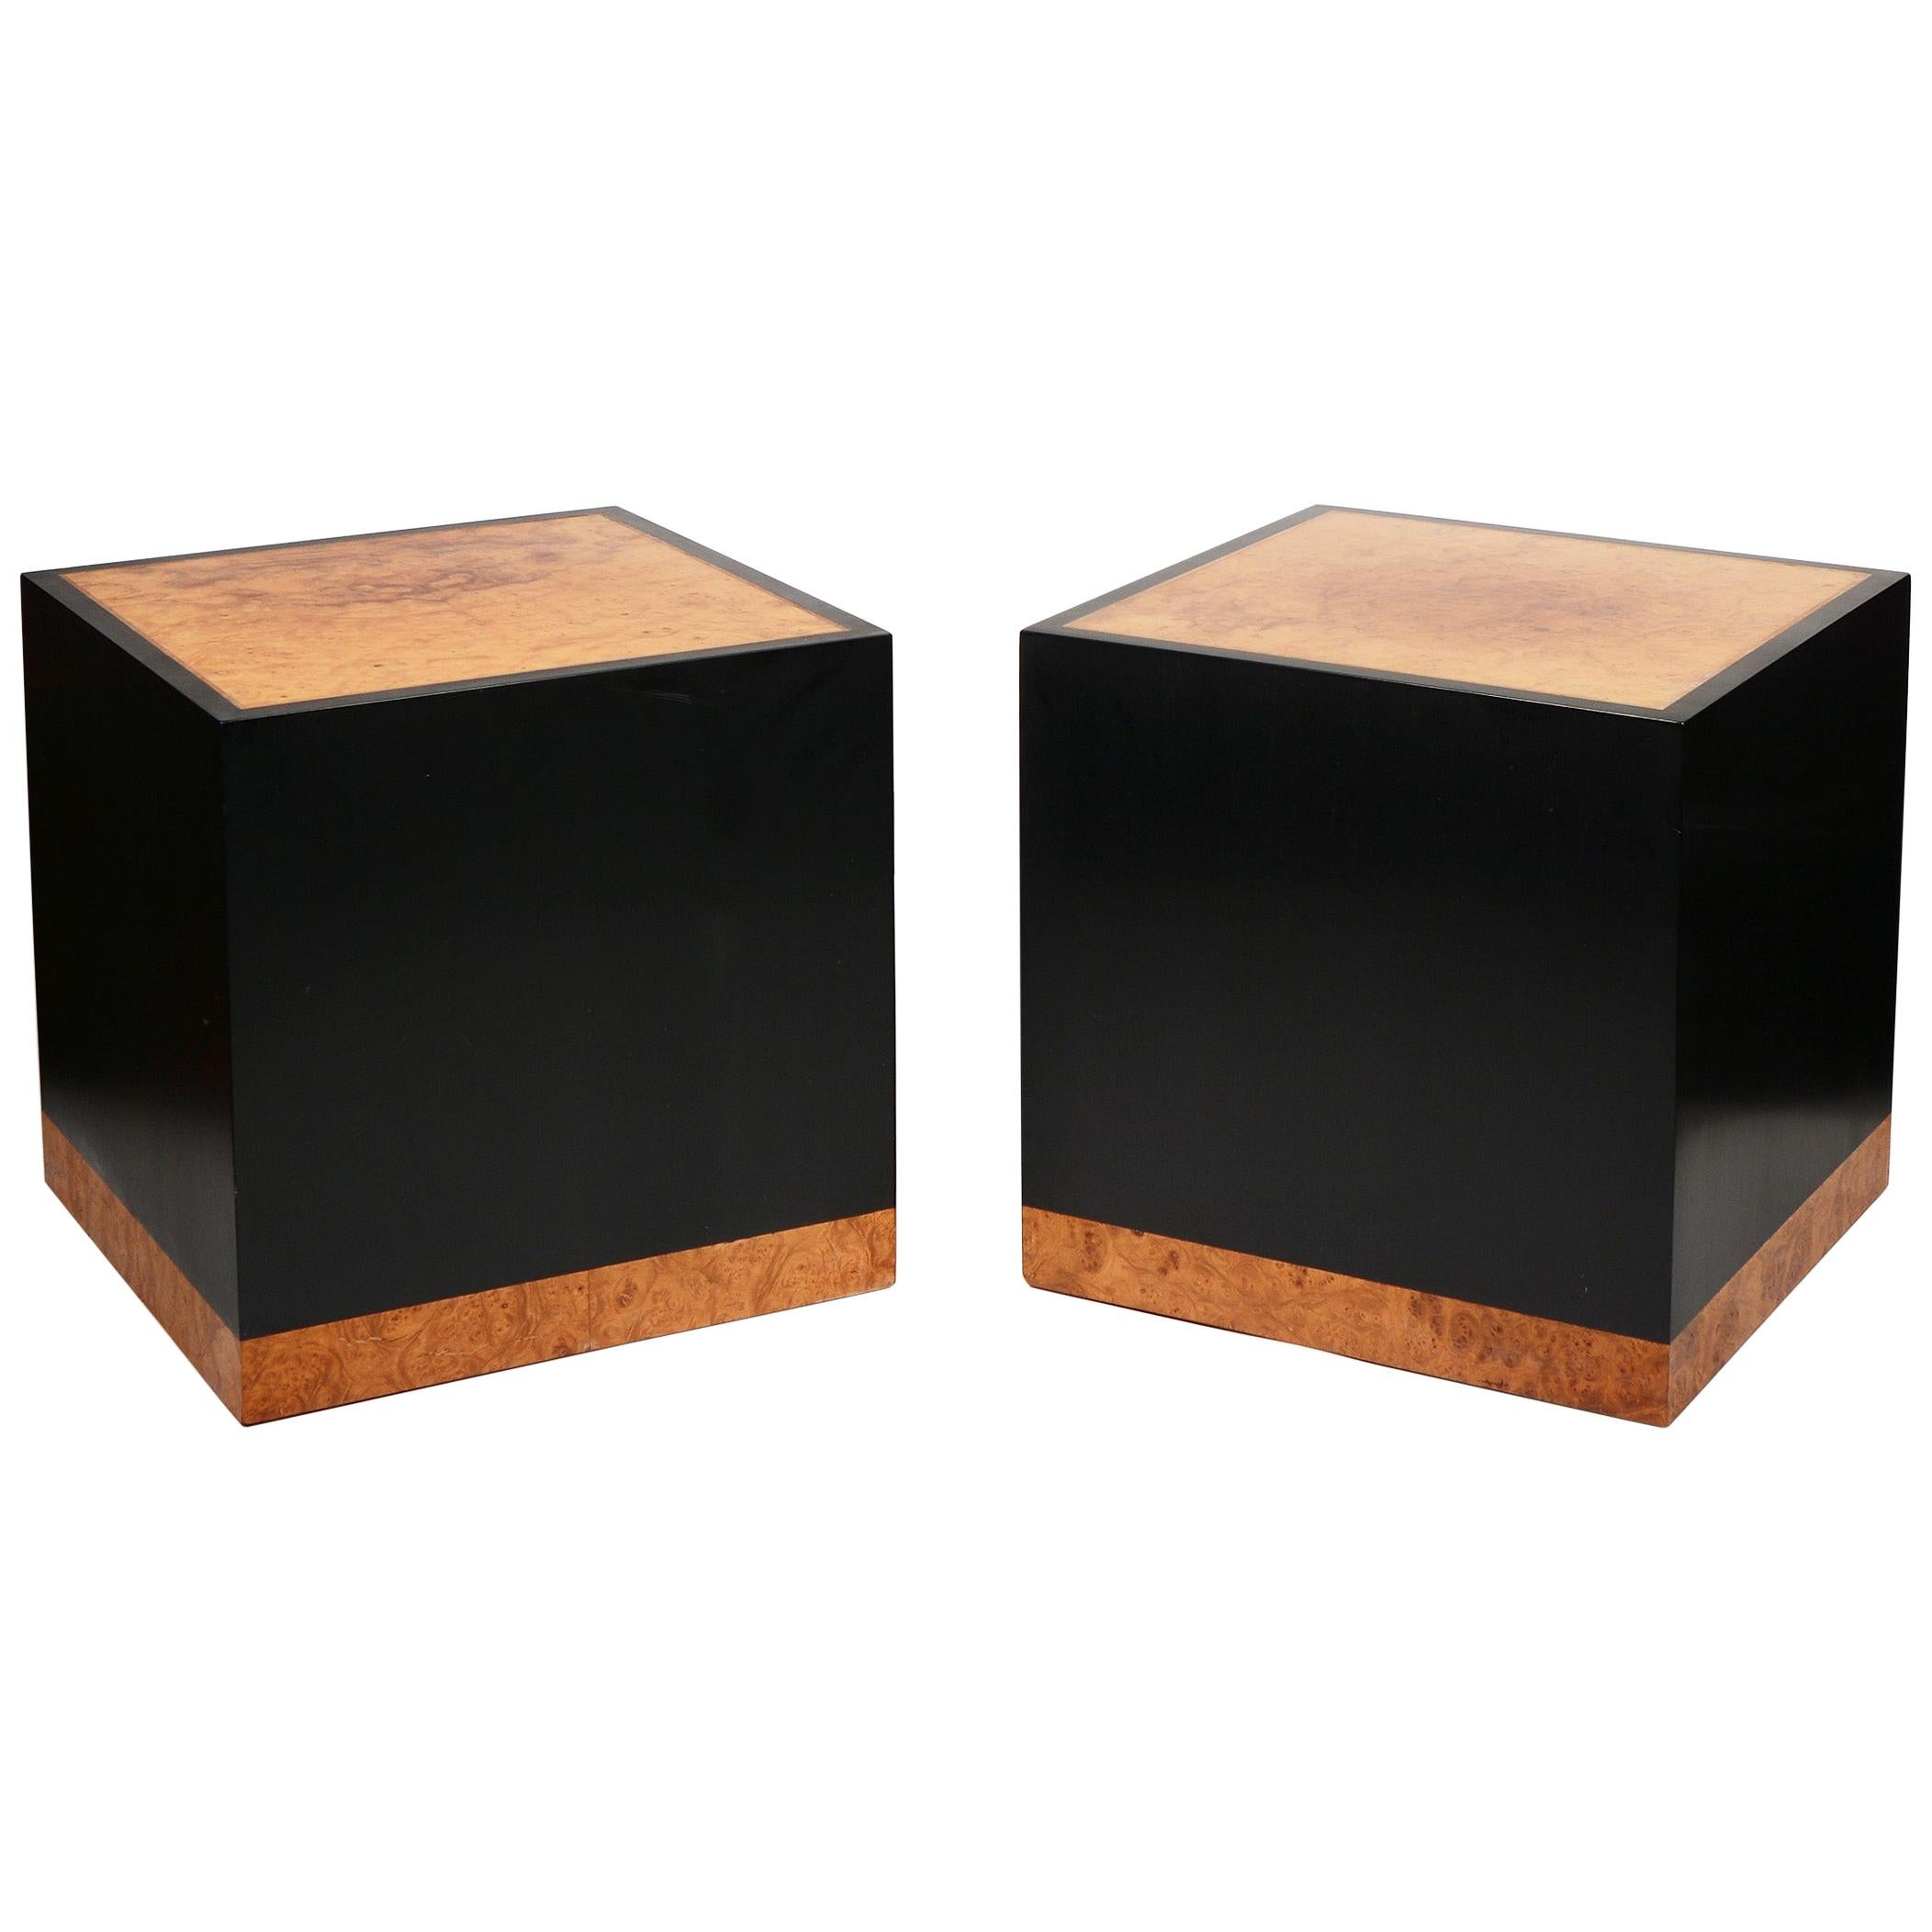 Pair of Birdseye Maple Burl and Resin Cube Side Tables by Edward Wormley